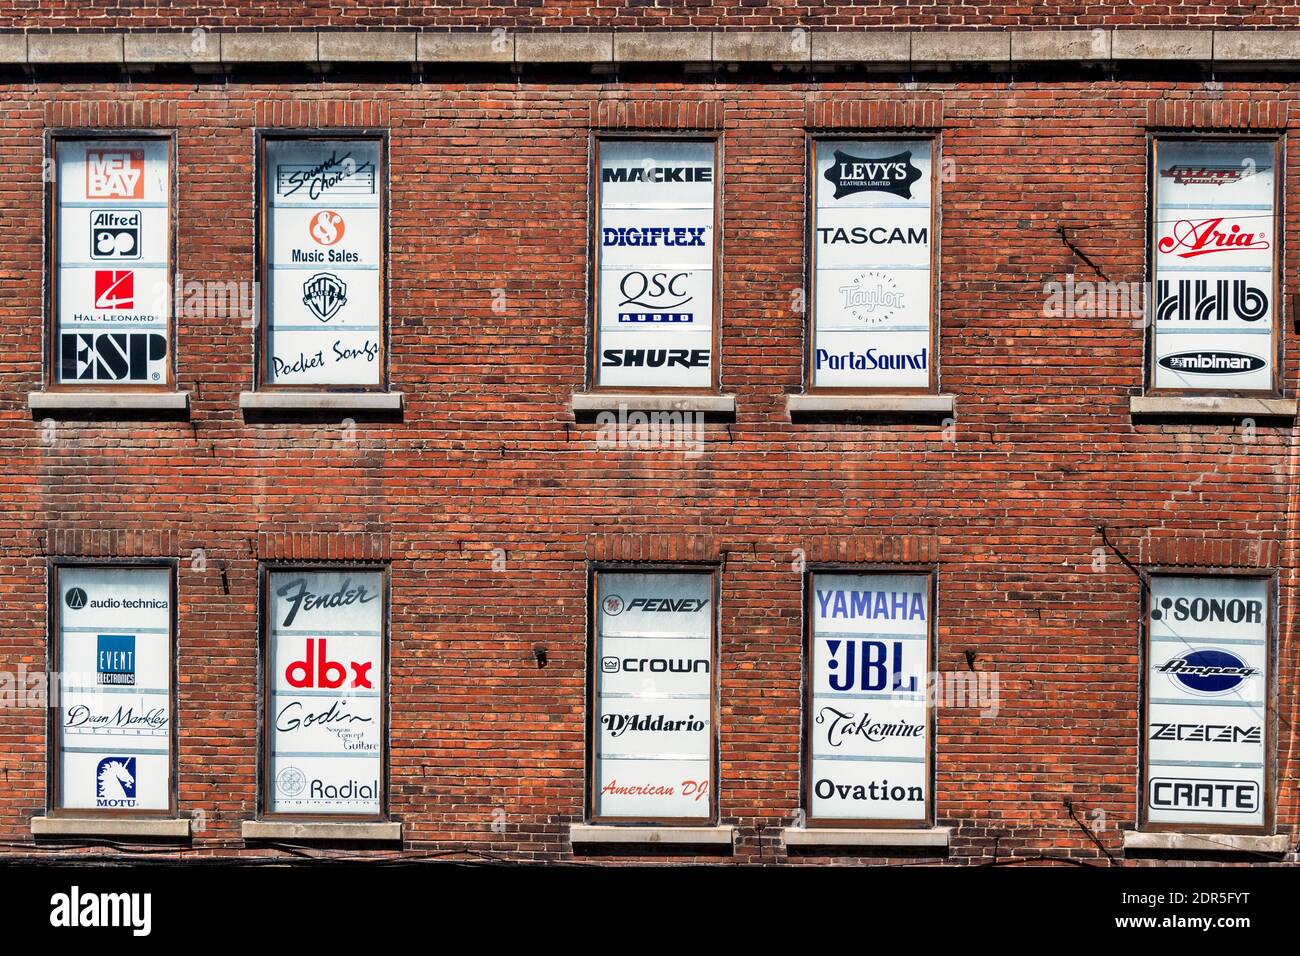 Multiple brand names covering the windows of an old building in Montreal, Canada Stock Photo